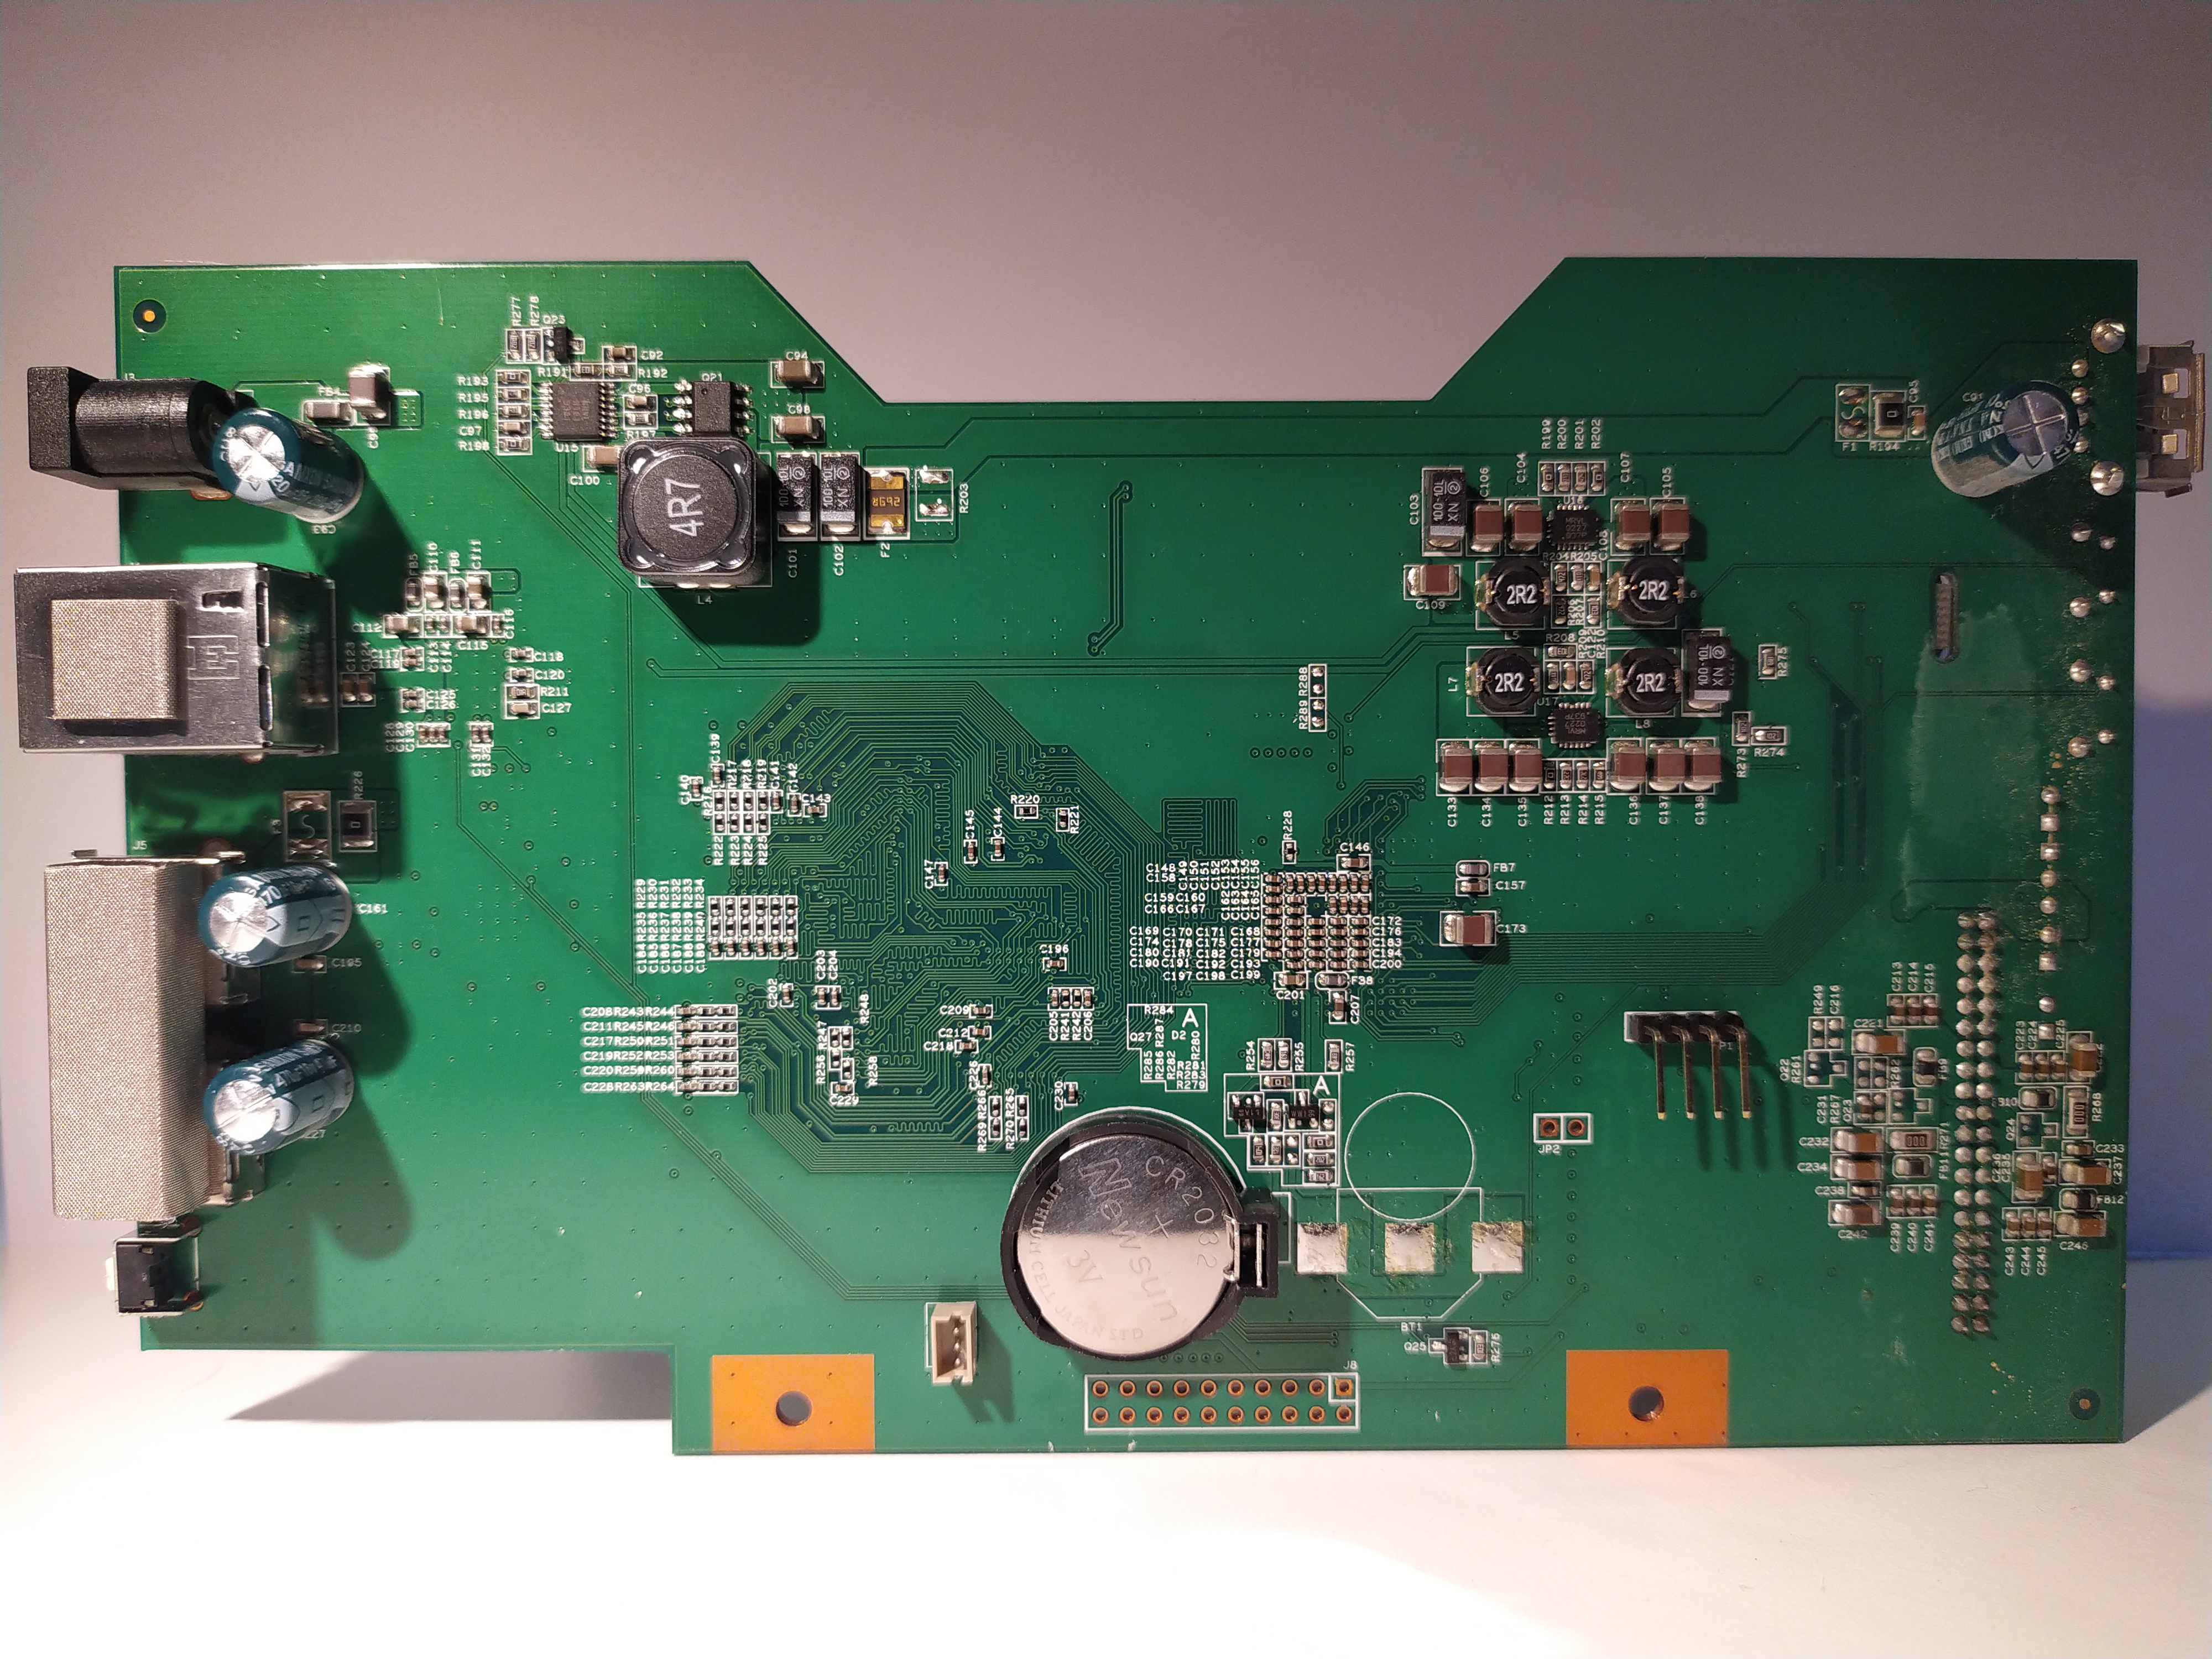 The ix2-200’s main board, placed upside down